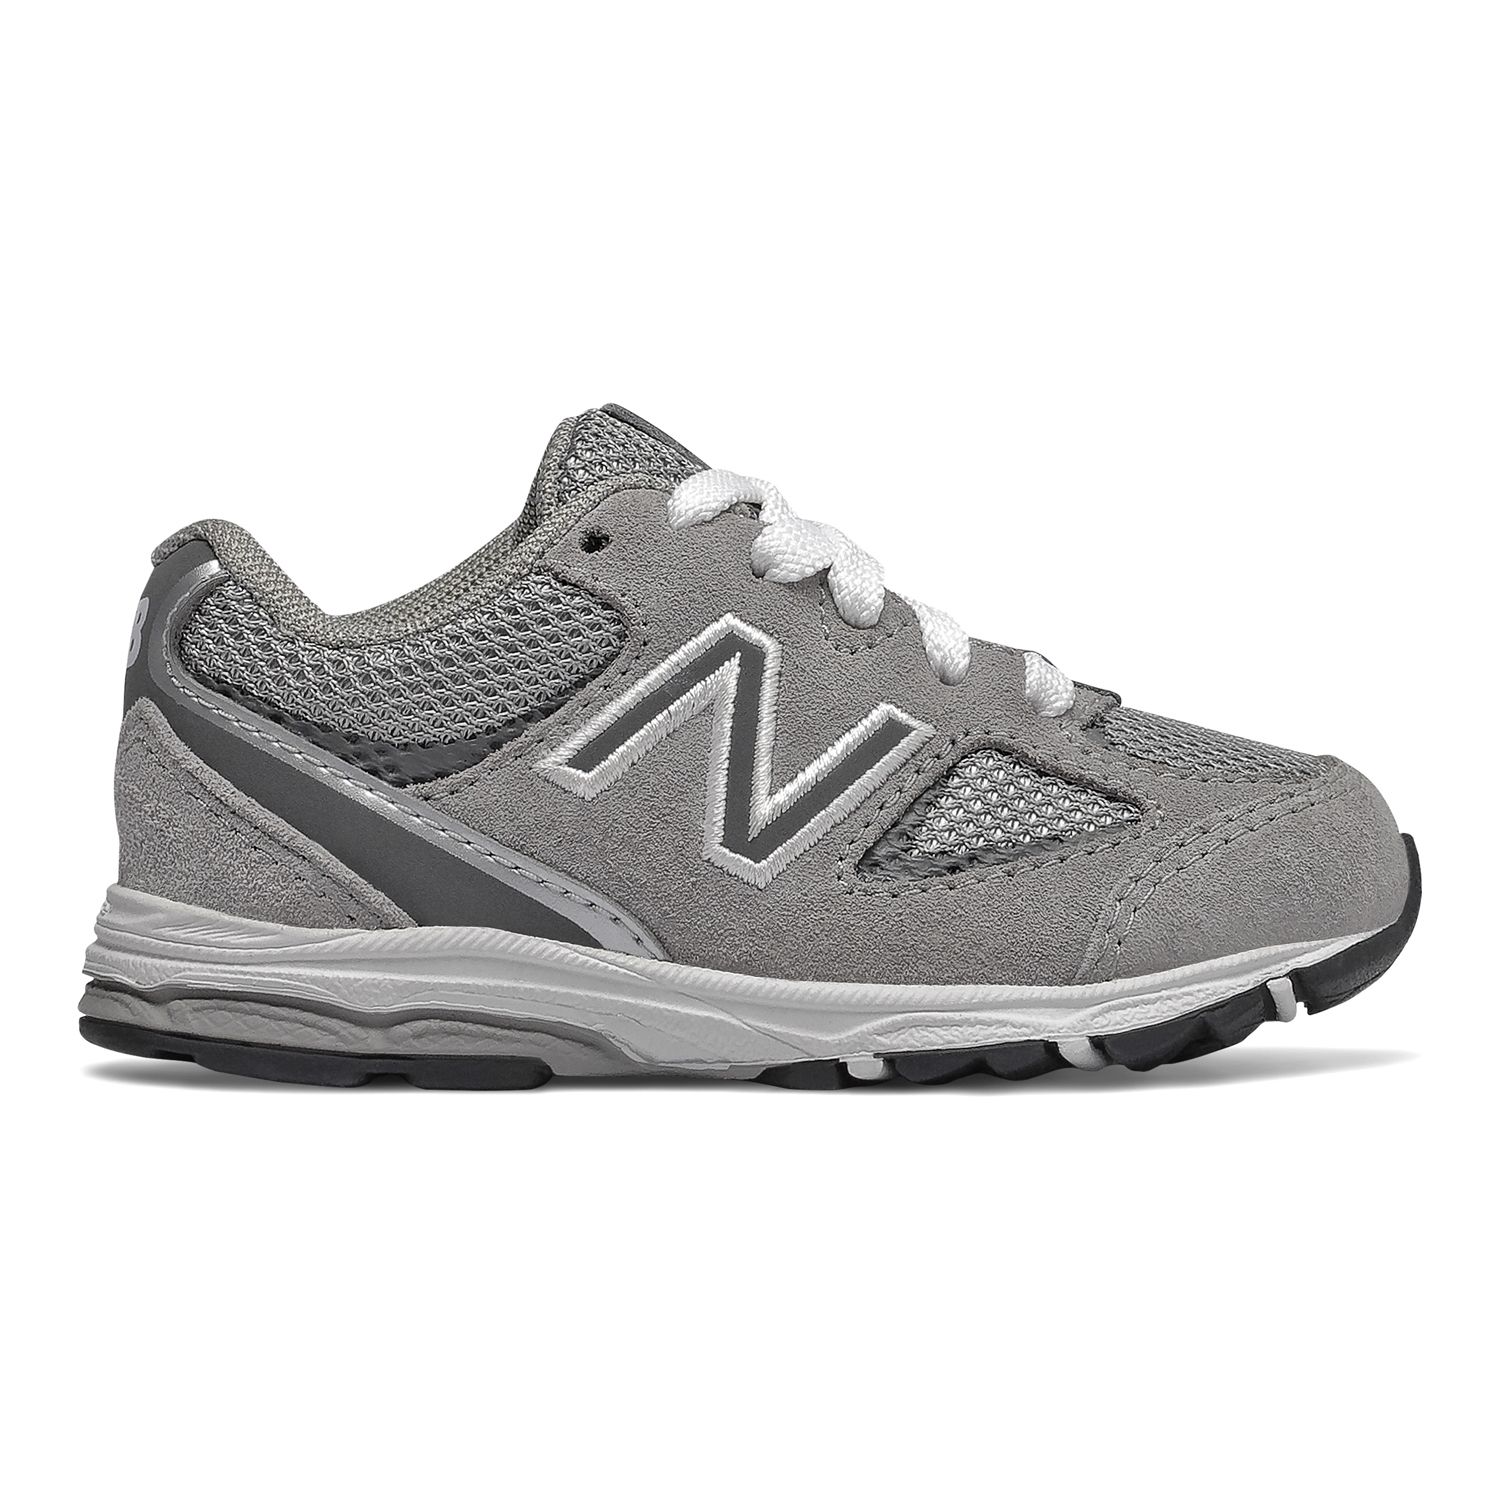 toddler new balance sneakers